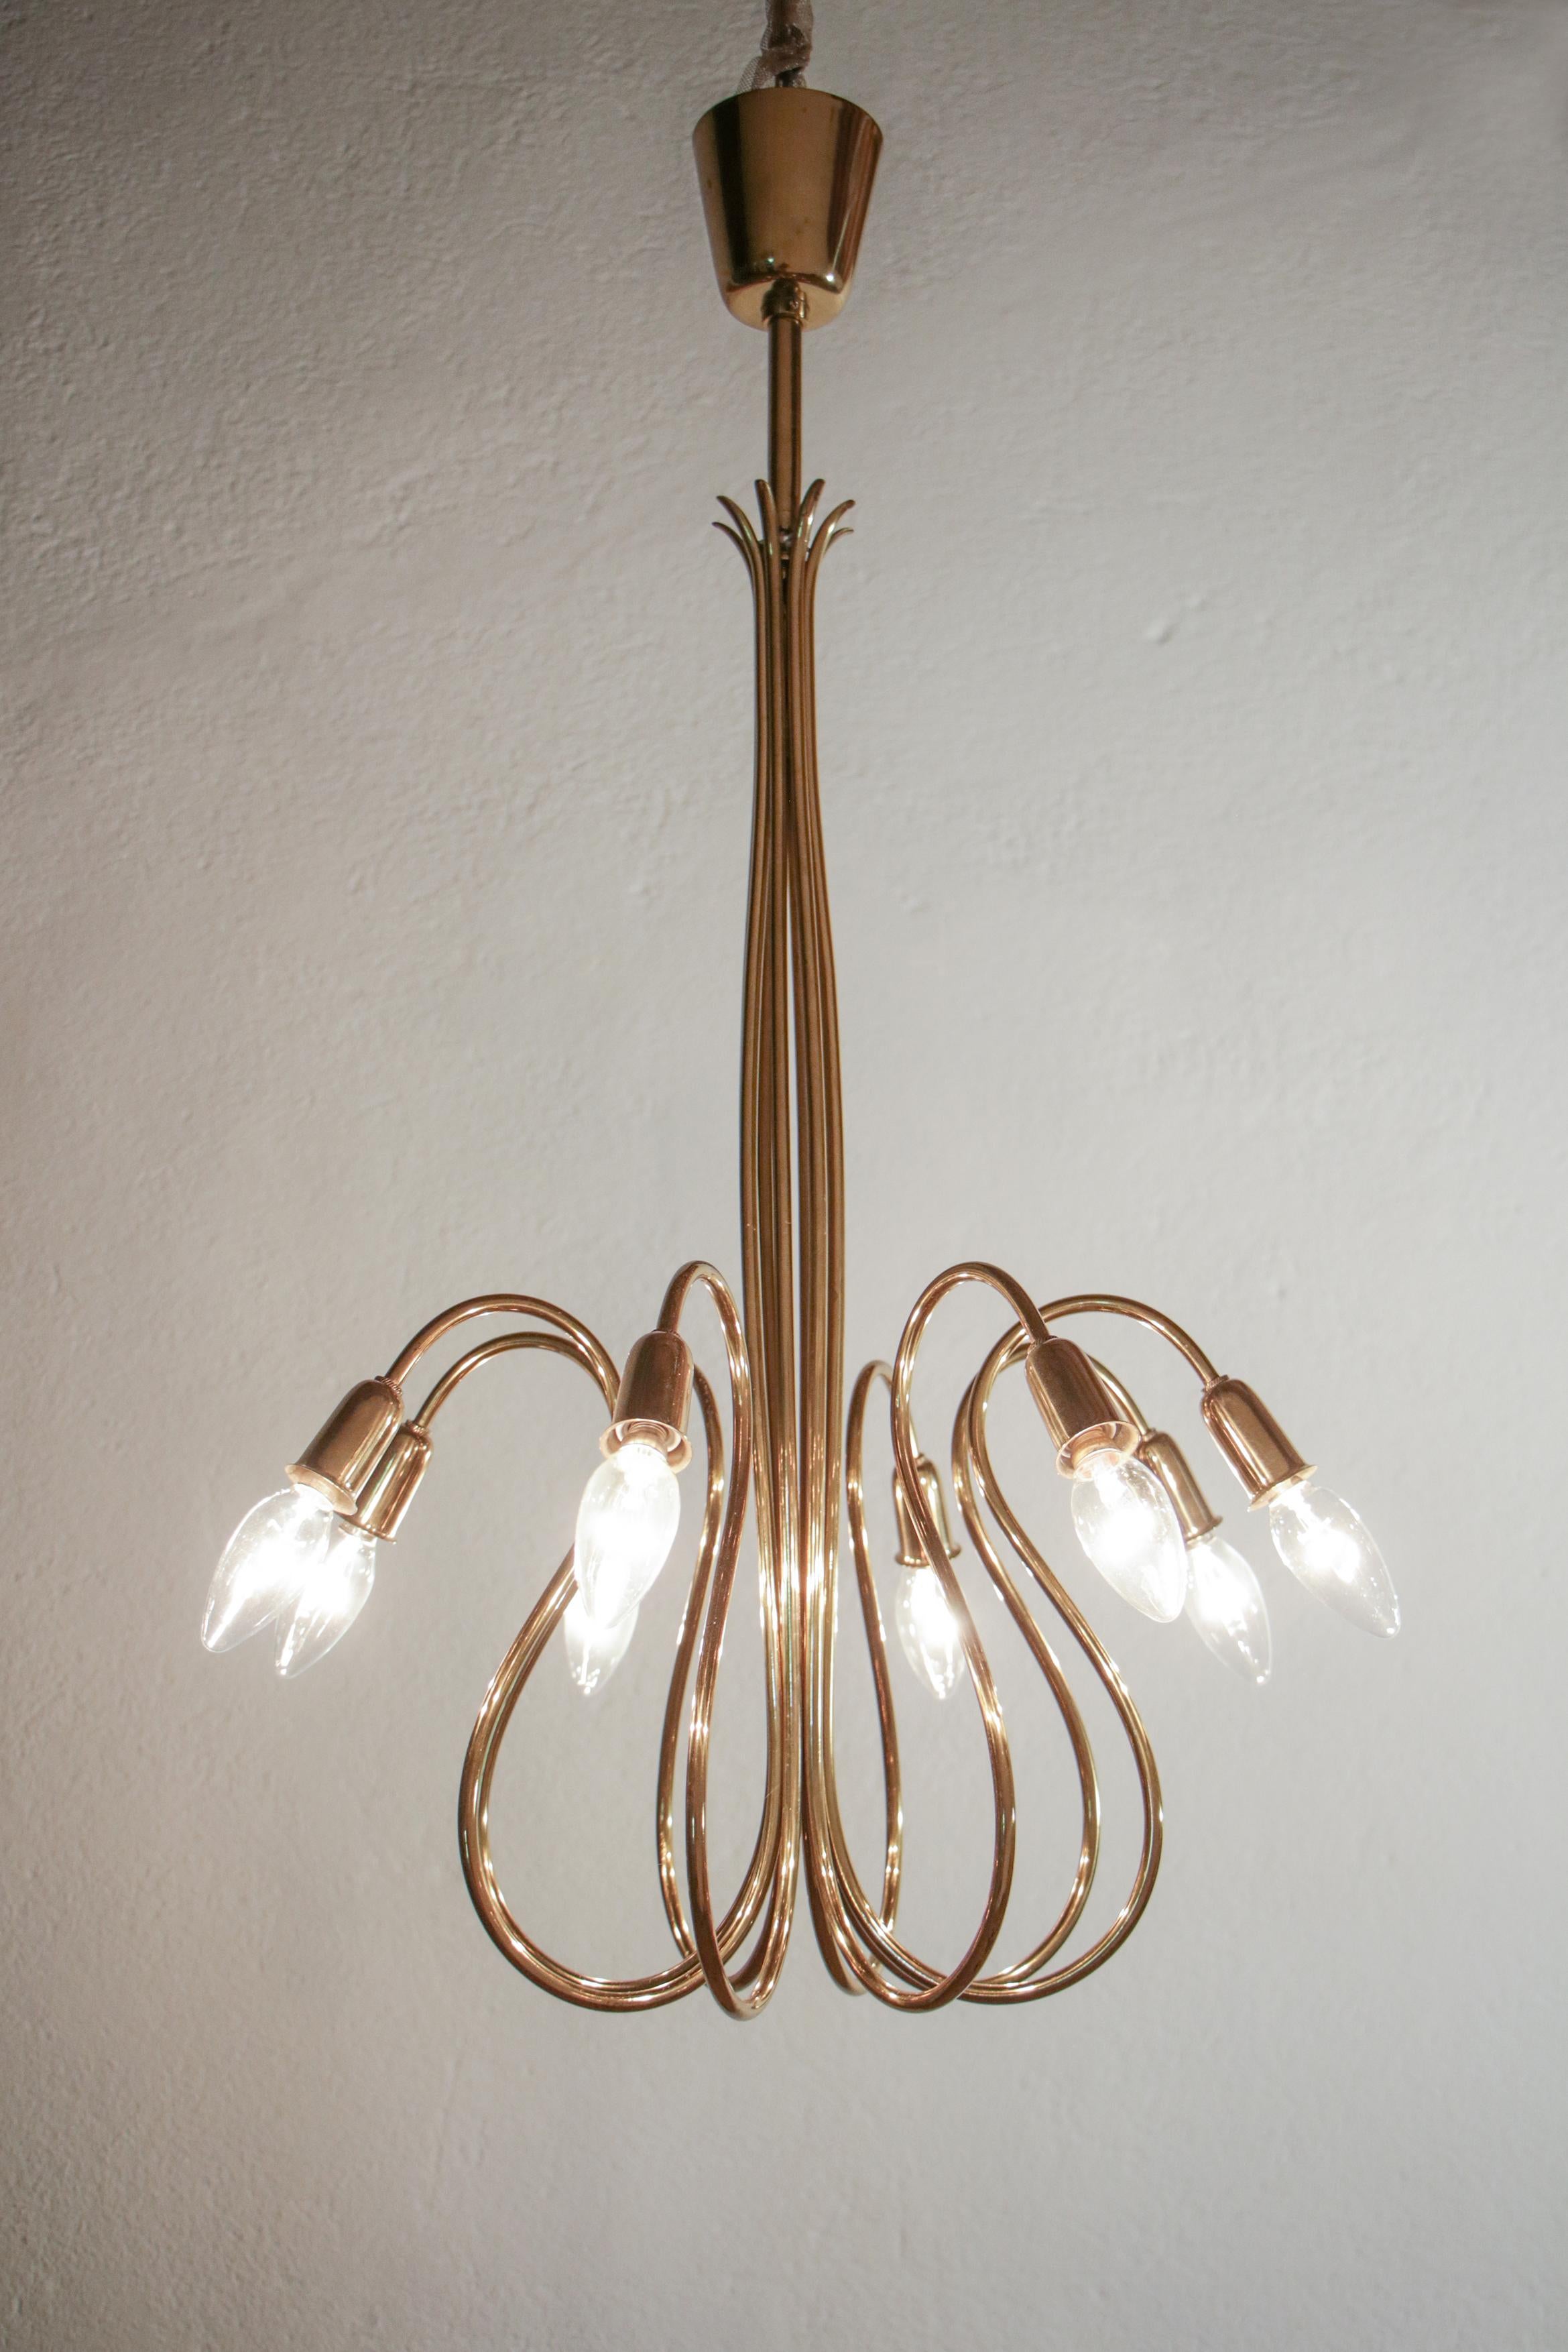 Splendid Austrian mid-century octopus shape chandelier with eight lights in E14 format, attributed to J.T. Kalmar, produced in the 1950s. The octopus chandelier is entirely made of bright brass. The line is elegant and represents a great executive